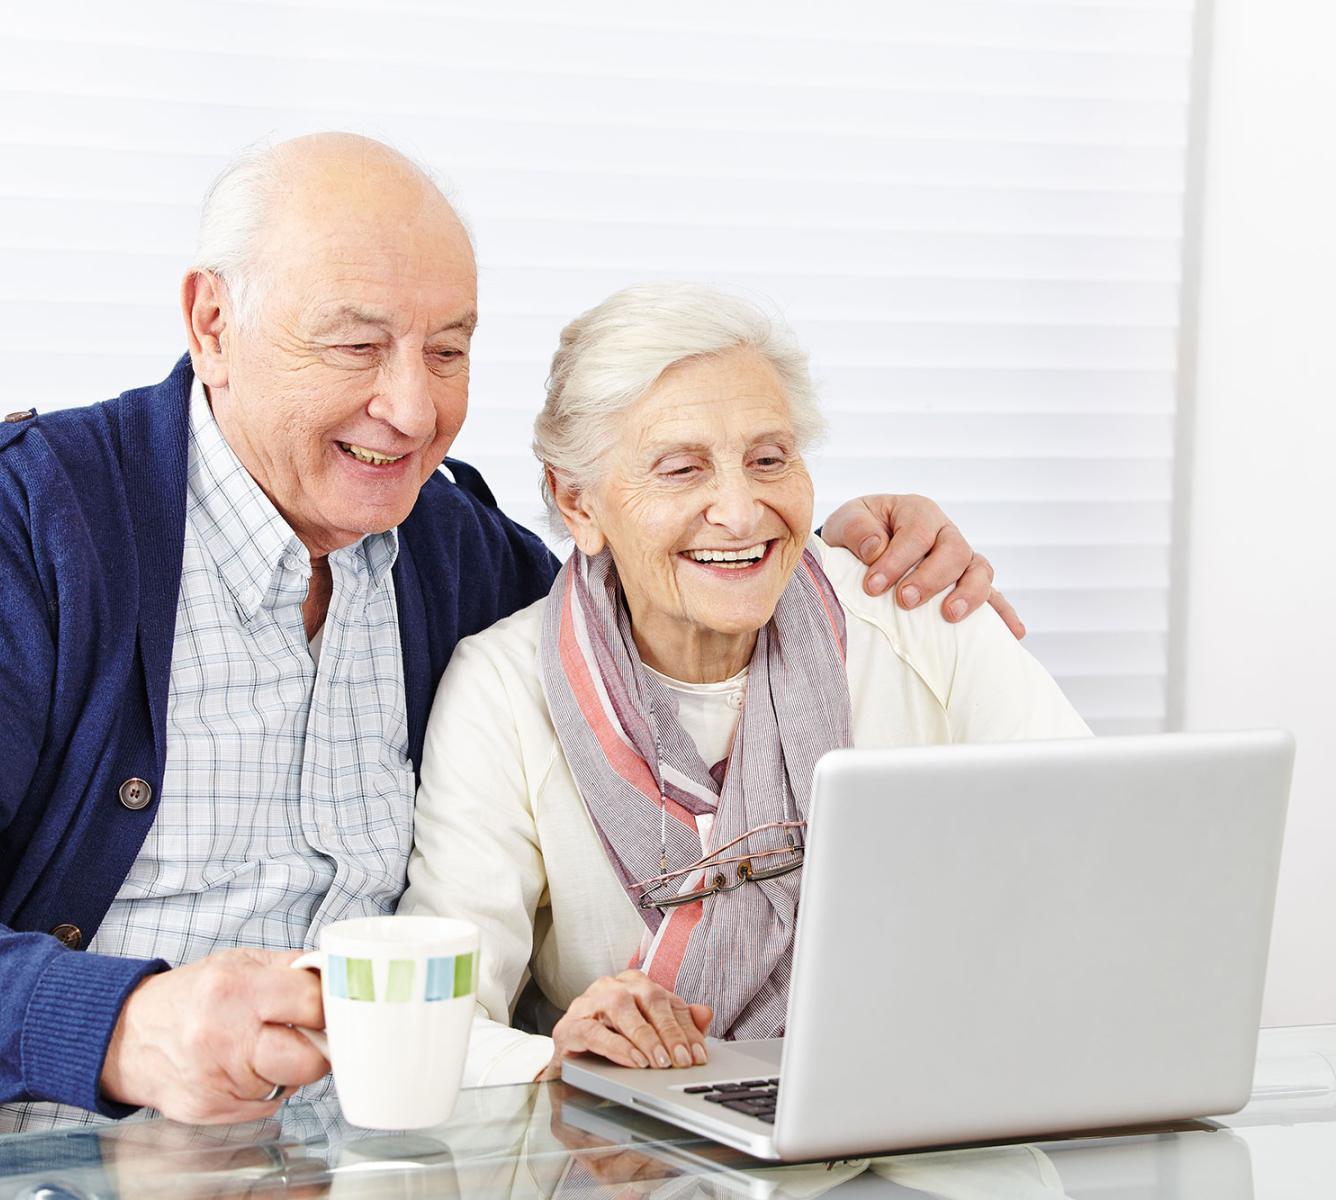 A couple smiling and looking at a laptop on their table. Man has his arm around her.